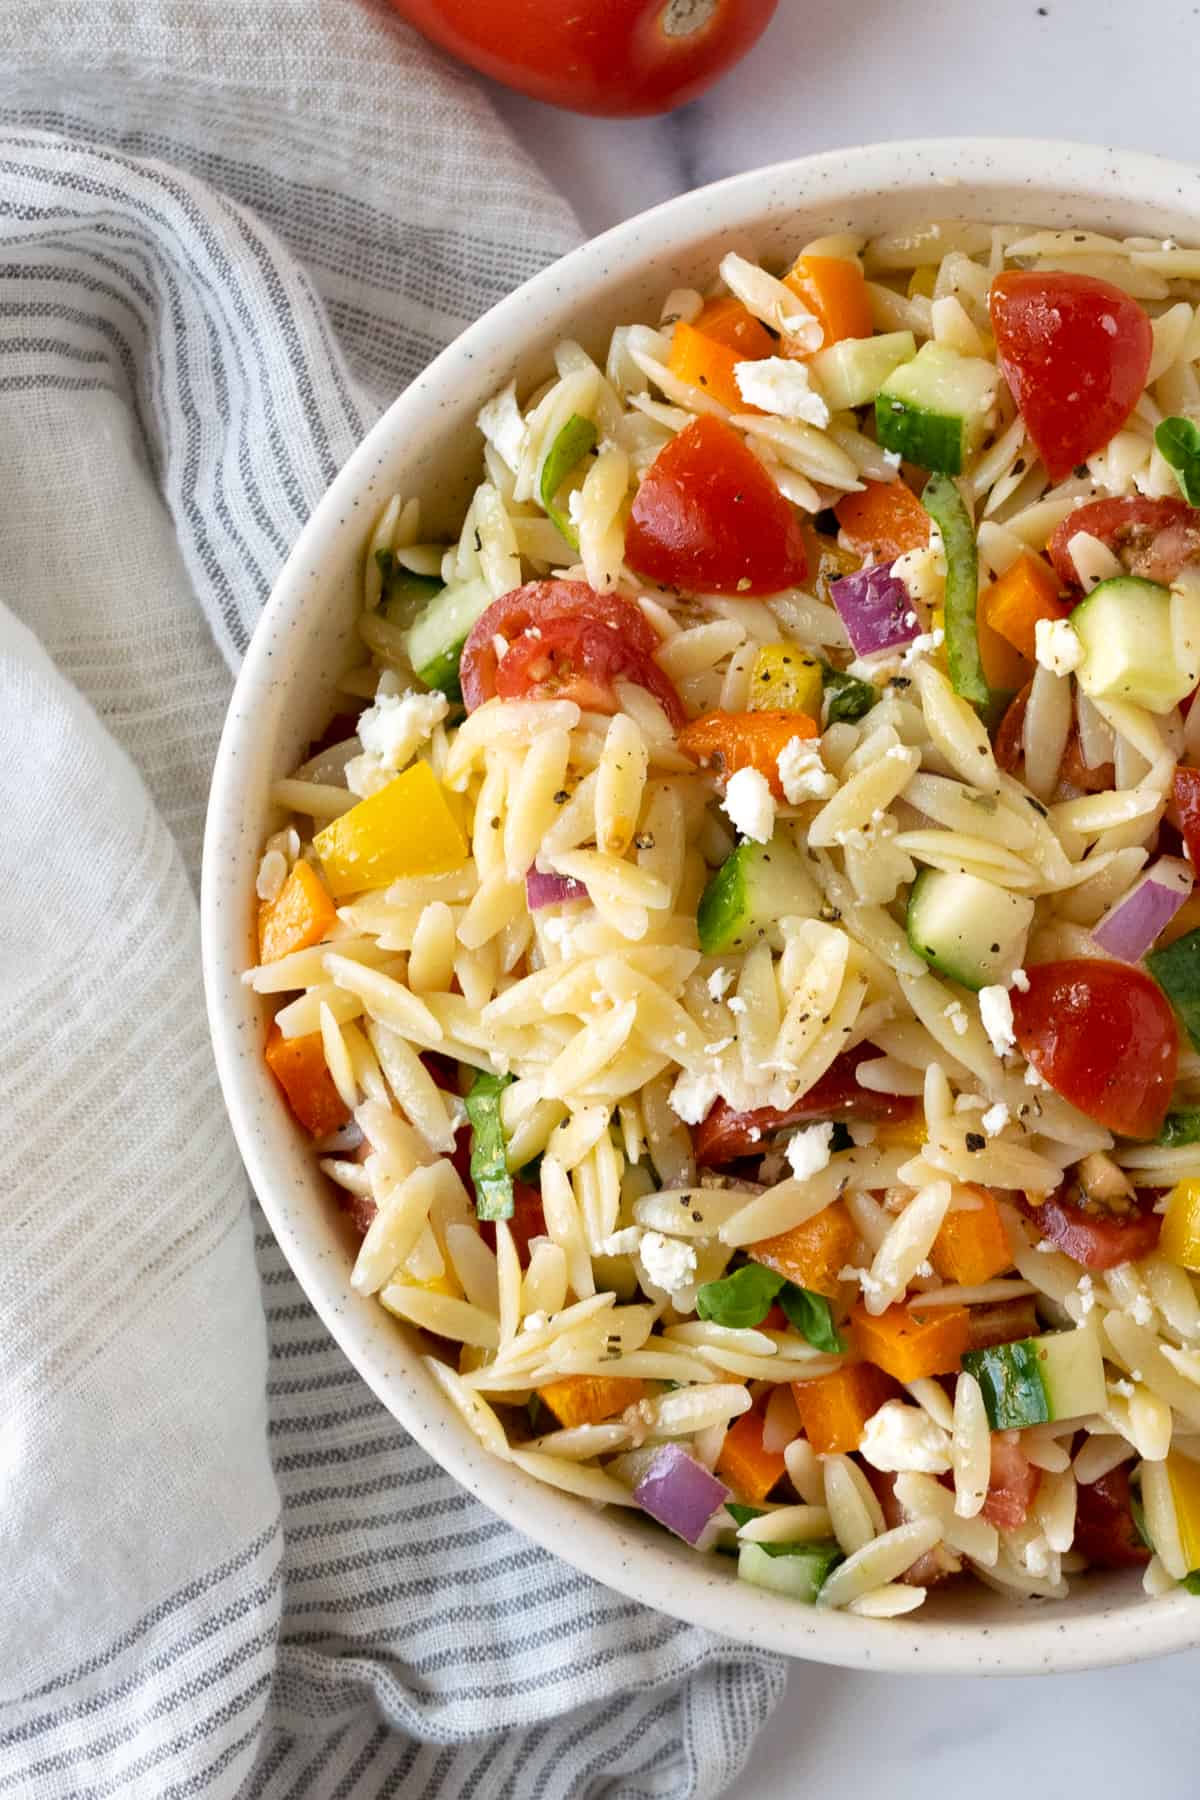 This is a photo of Rainbow Orzo Salad served in an off-white serving bowl.